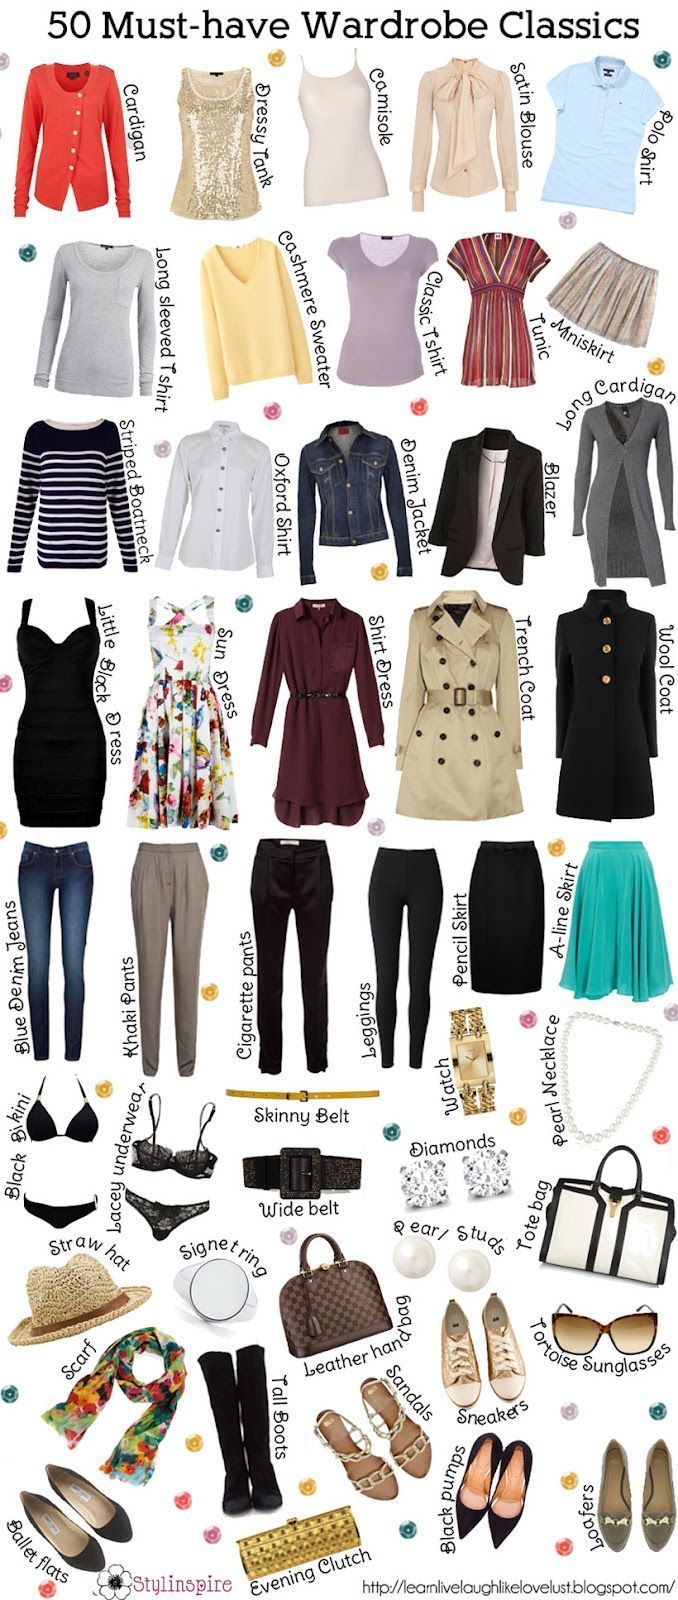 … Must have clothing items classics for wardrobe..have some .need toprint and make check off list in clo